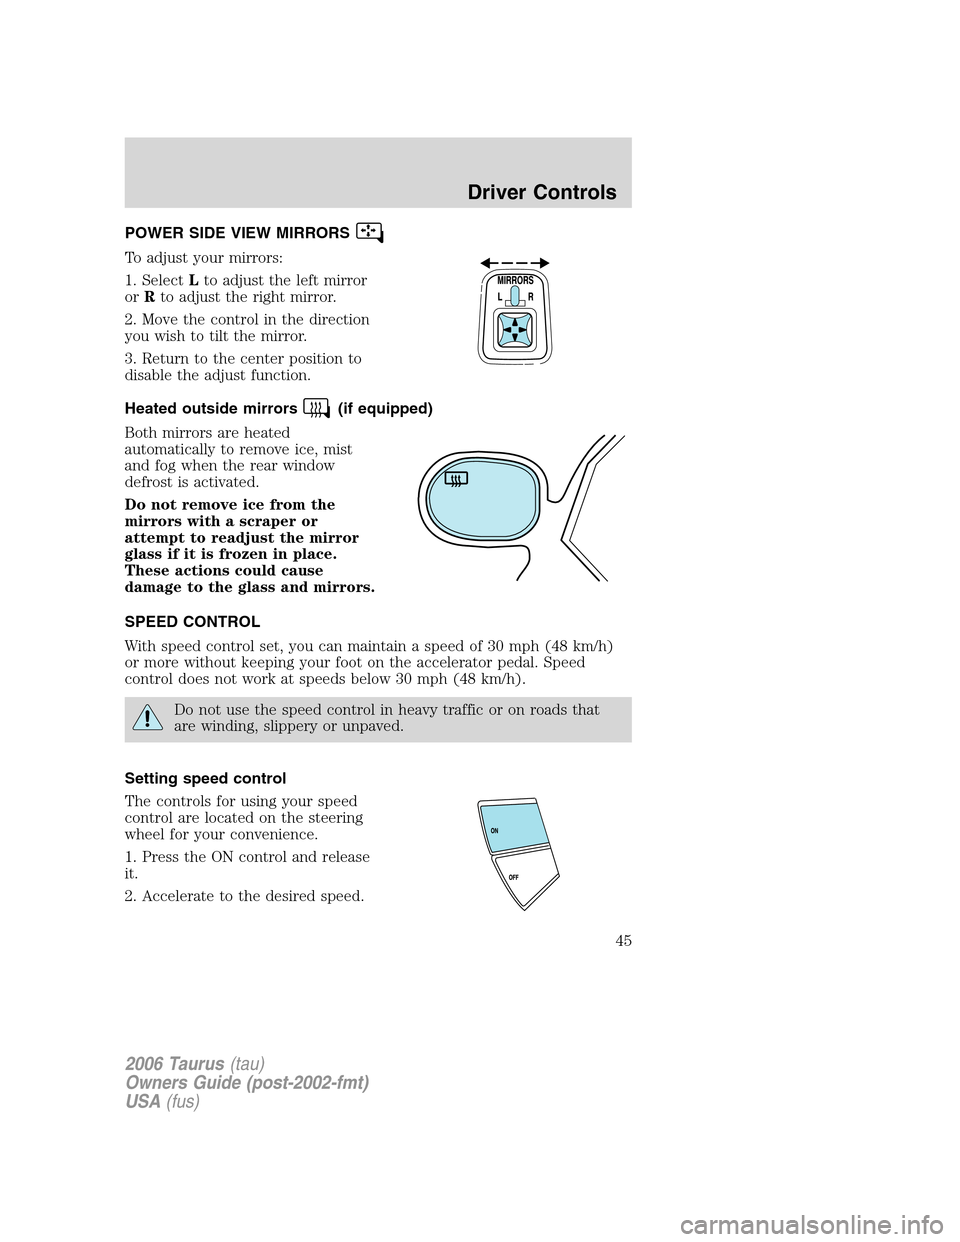 FORD TAURUS 2006 4.G Service Manual POWER SIDE VIEW MIRRORS
To adjust your mirrors:
1. SelectLto adjust the left mirror
orRto adjust the right mirror.
2. Move the control in the direction
you wish to tilt the mirror.
3. Return to the ce